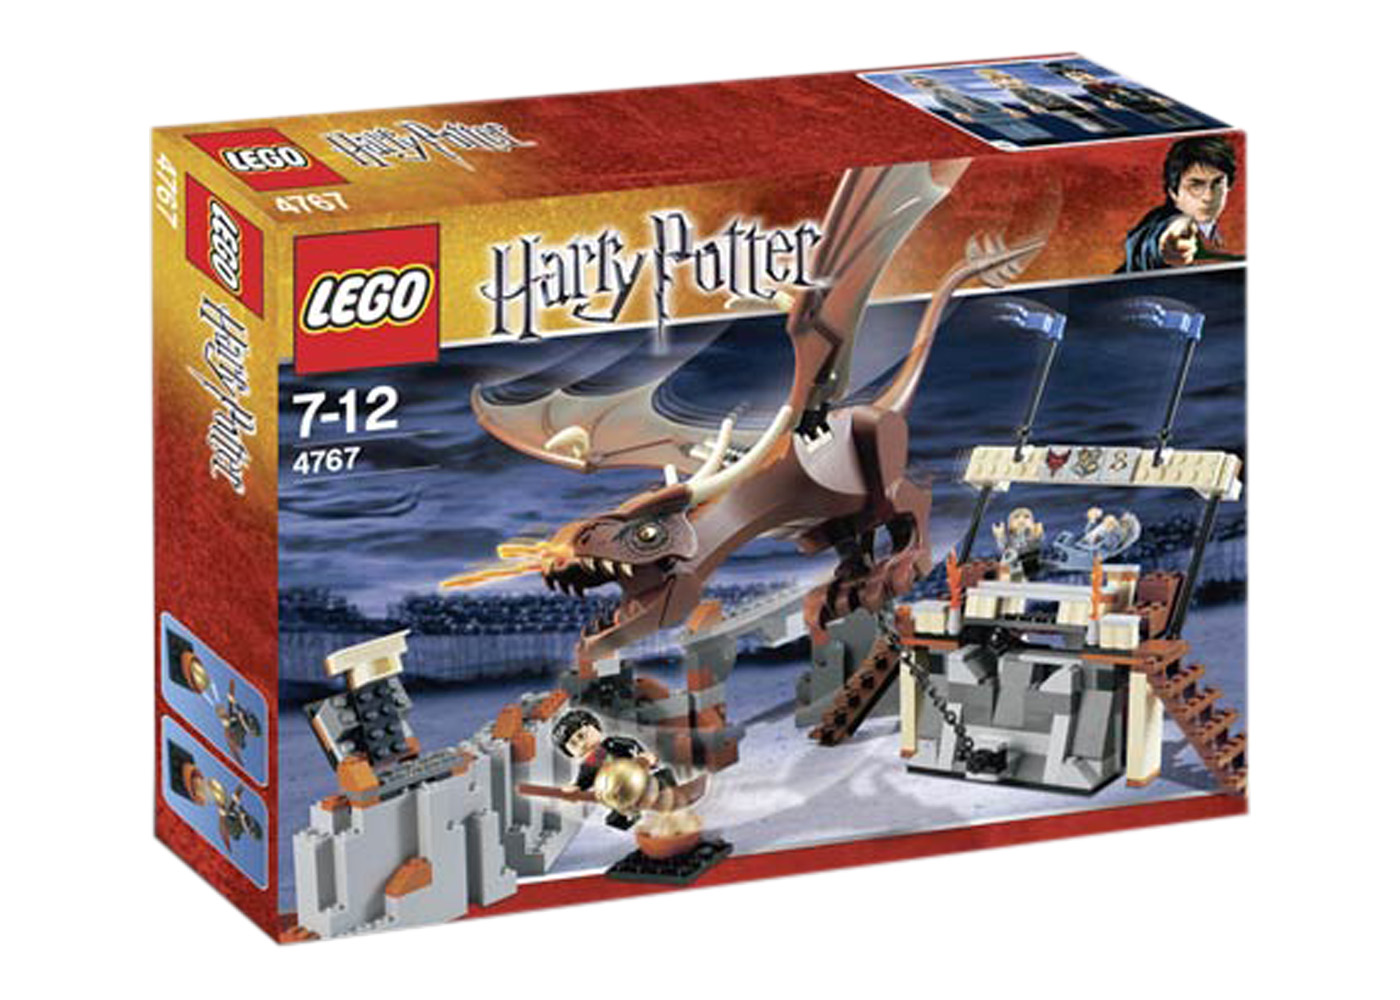 LEGO Harry Potter Harry and the Hungarian Horntail Set 4767 - JP